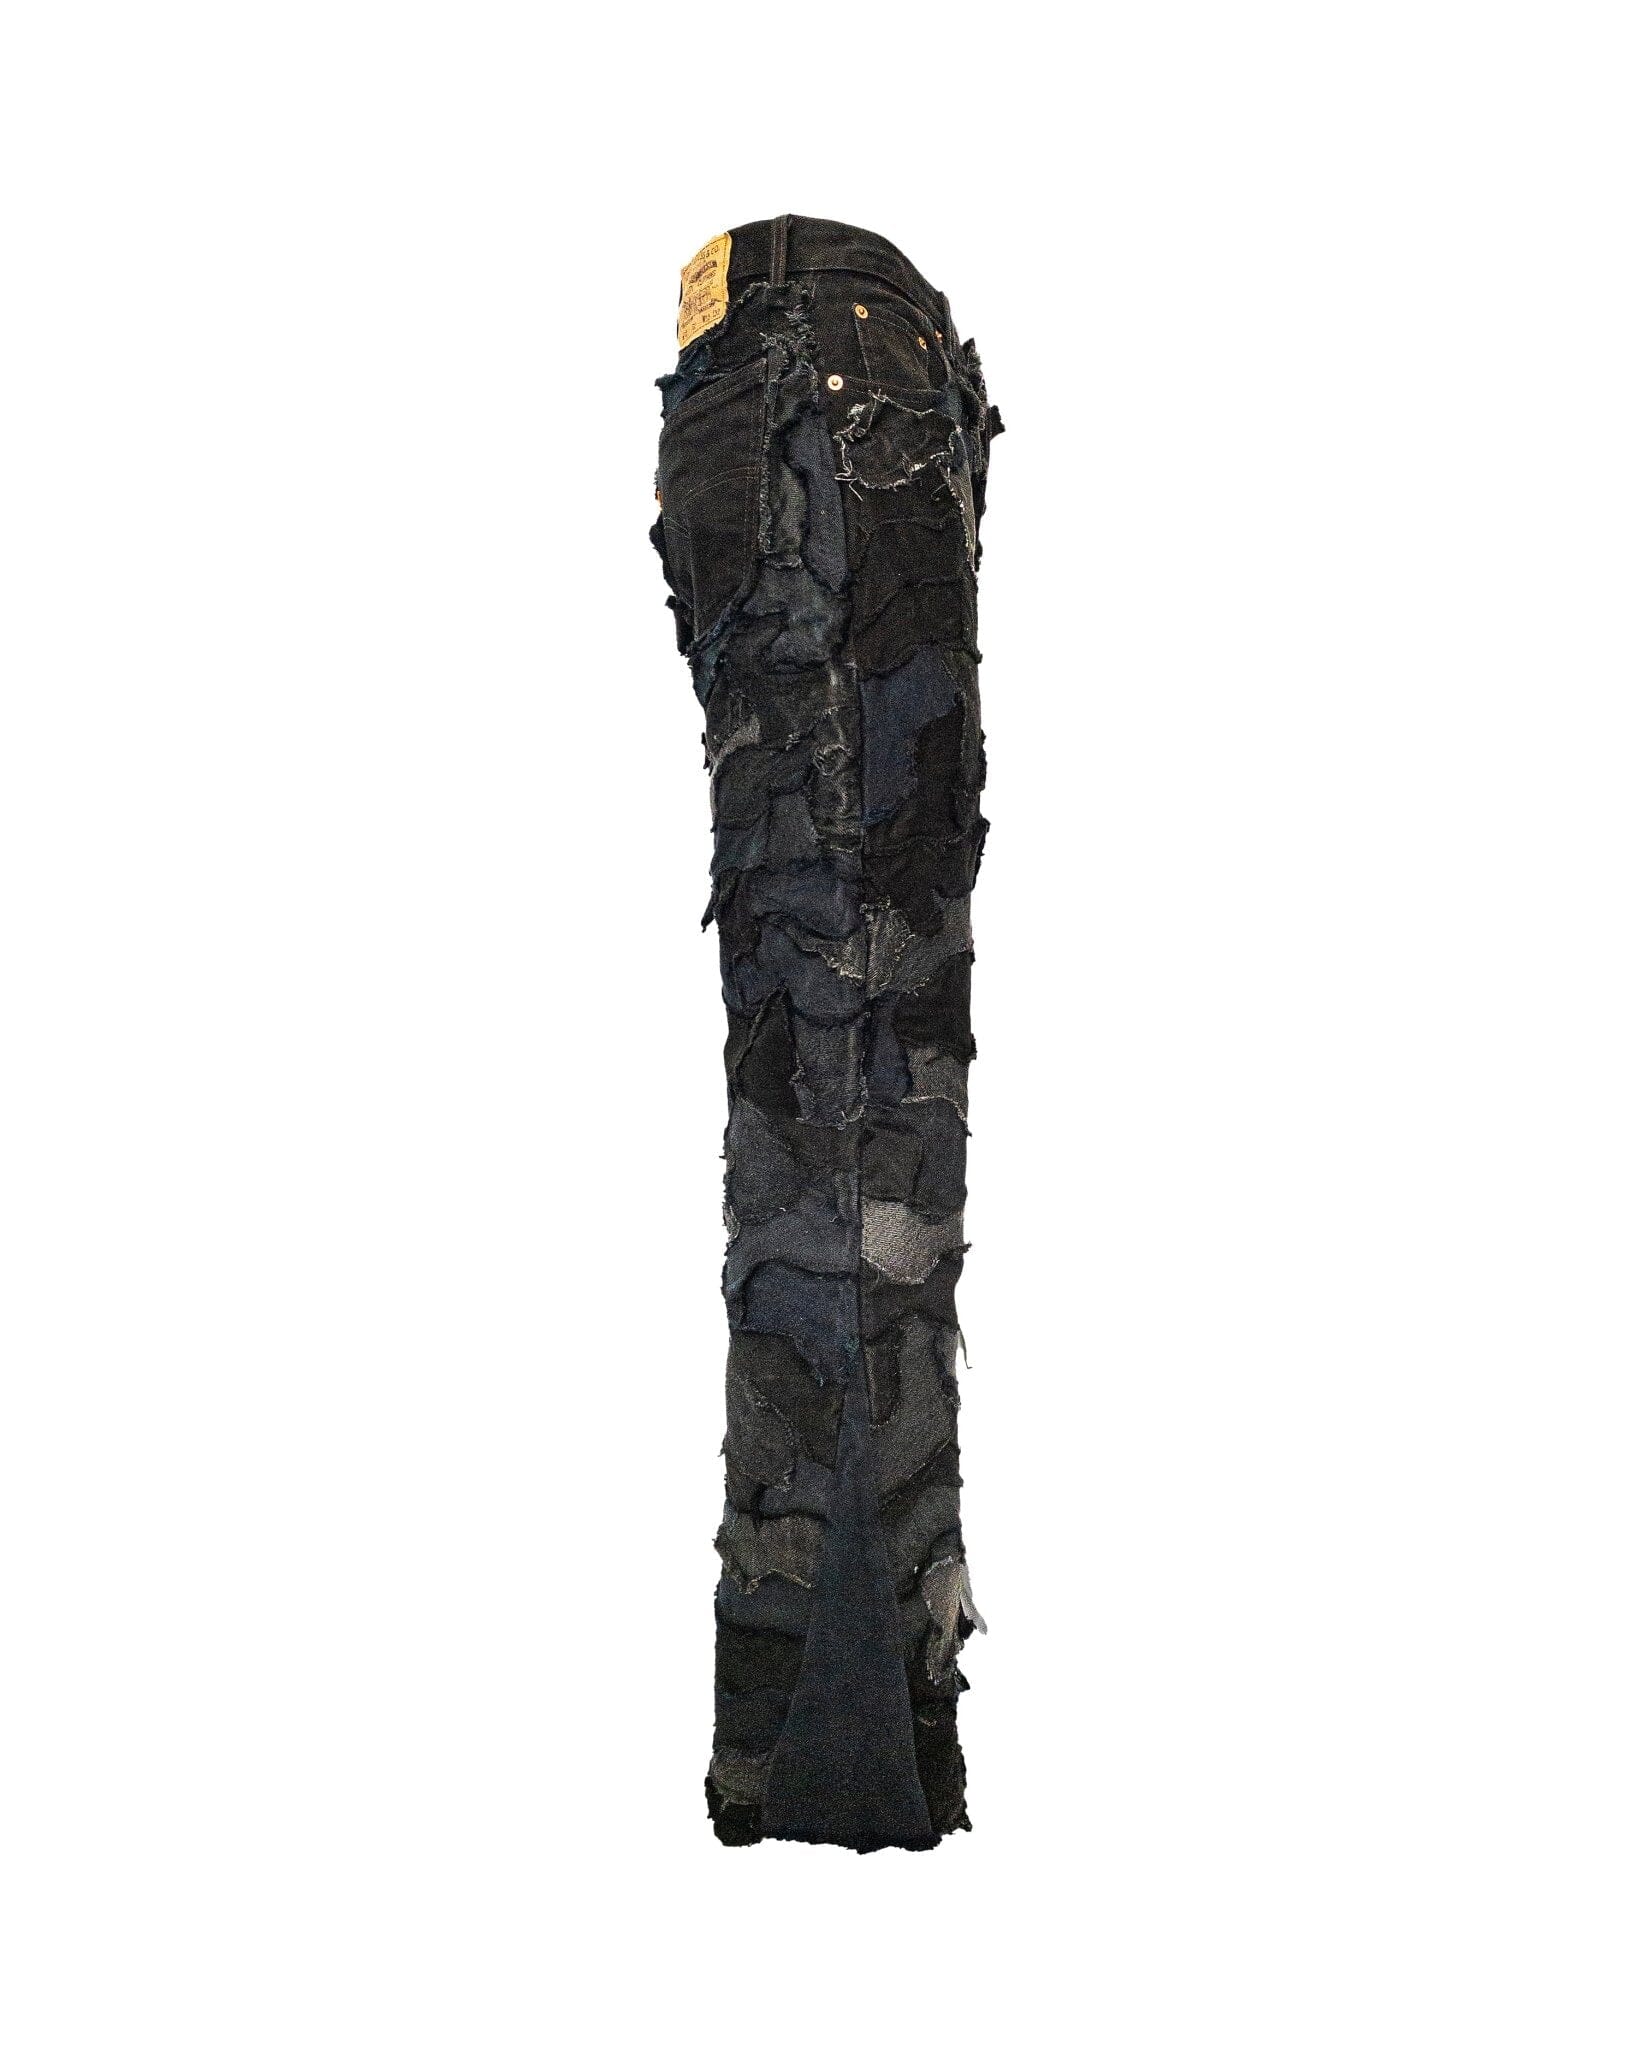 Jeans Straight Flare camouflage patchwork reworked